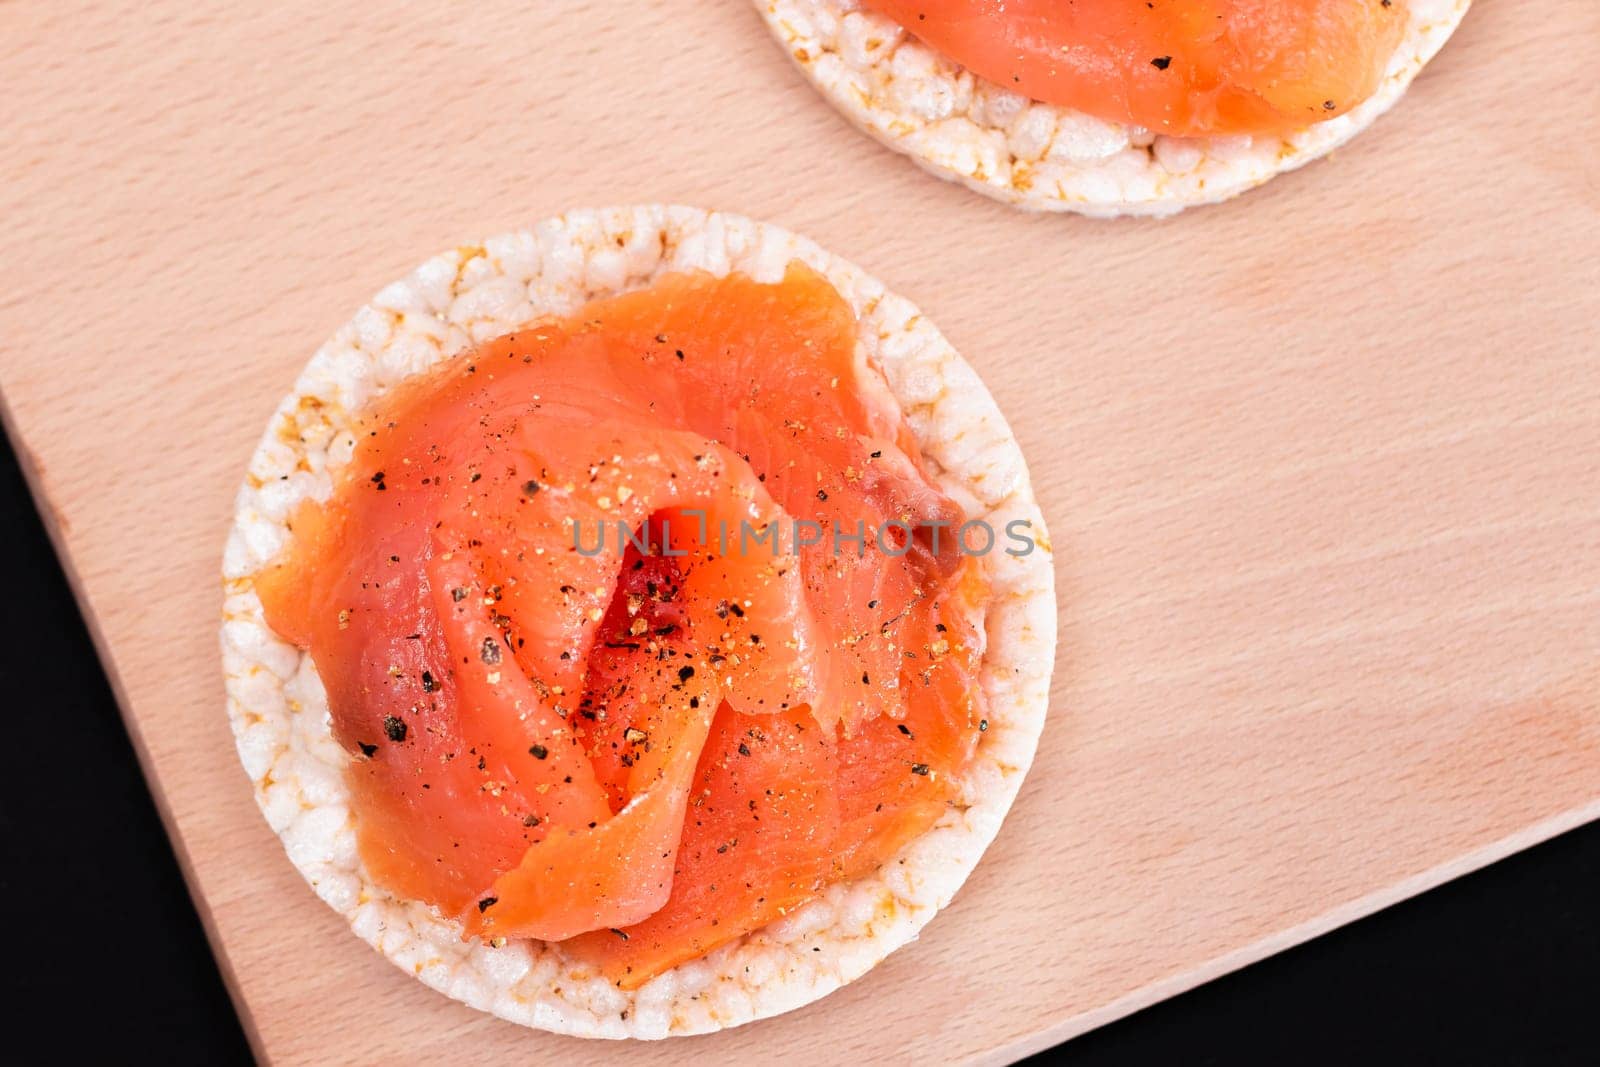 Tasty Rice Cake Sandwiches with Fresh Salmon Slices on Cutting Board - Top View. Easy Breakfast and Diet Food. Crispbread with Red Fish. Healthy Dietary Snack